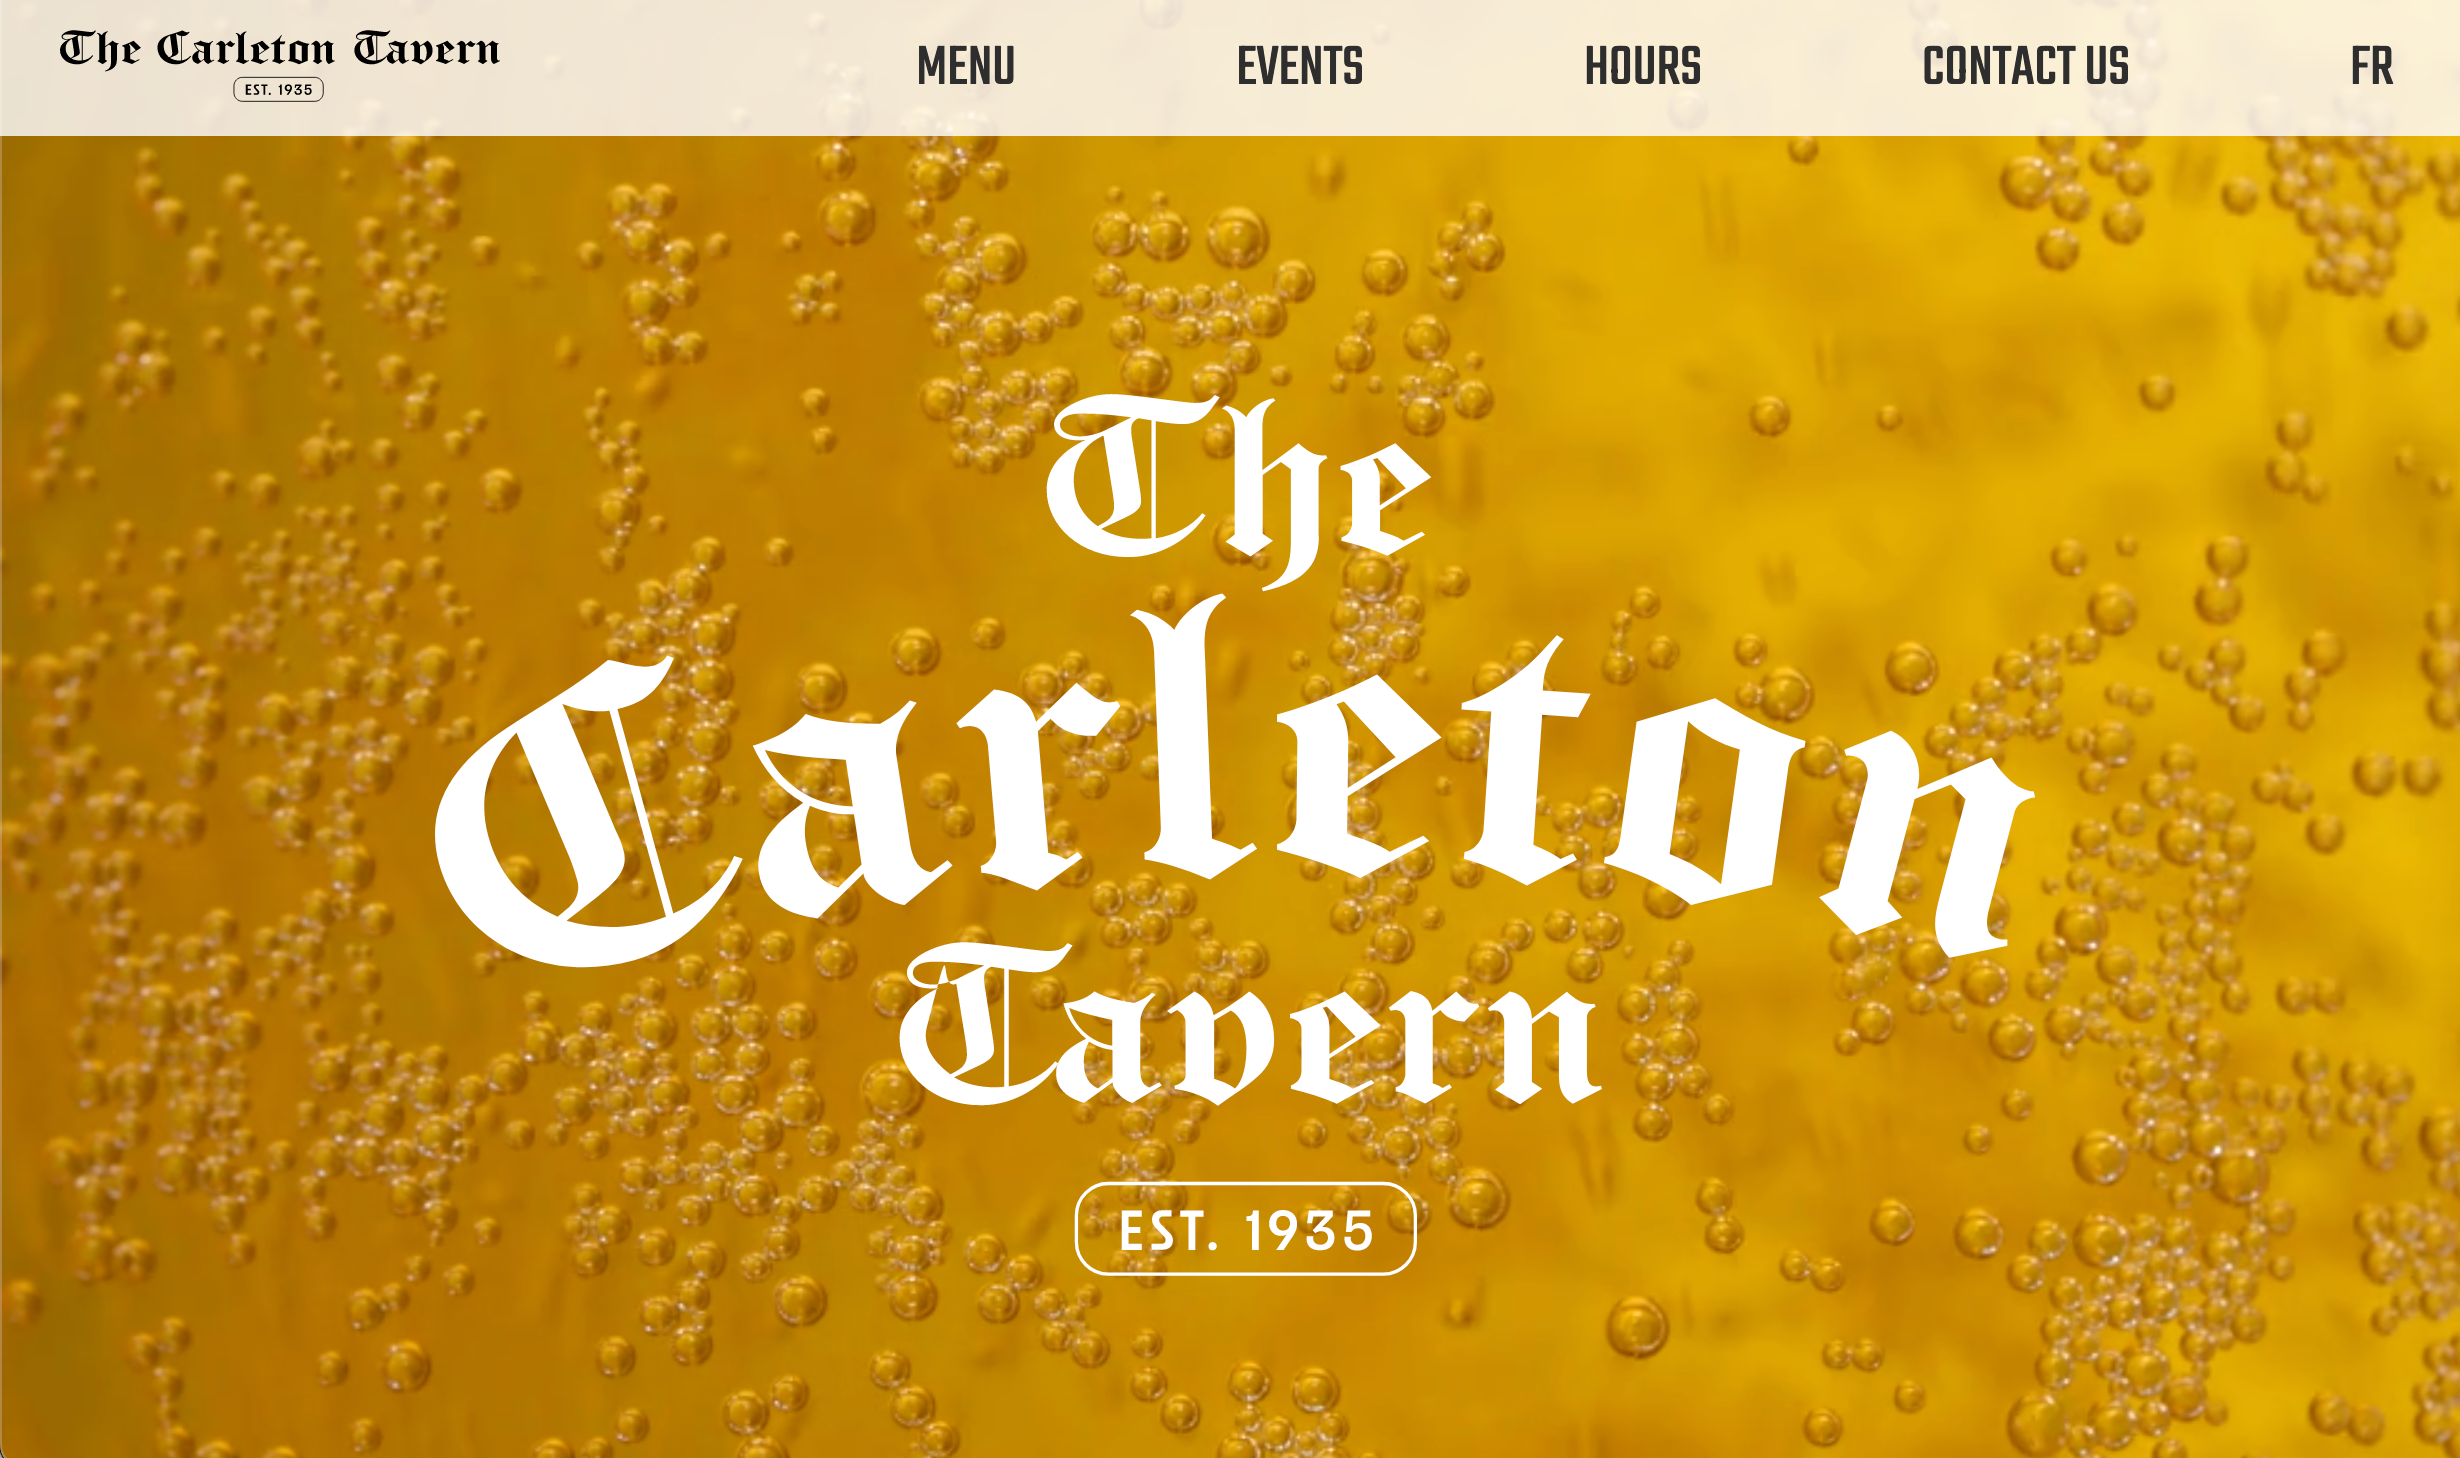 The Carleton Tavern screen capture of the home page